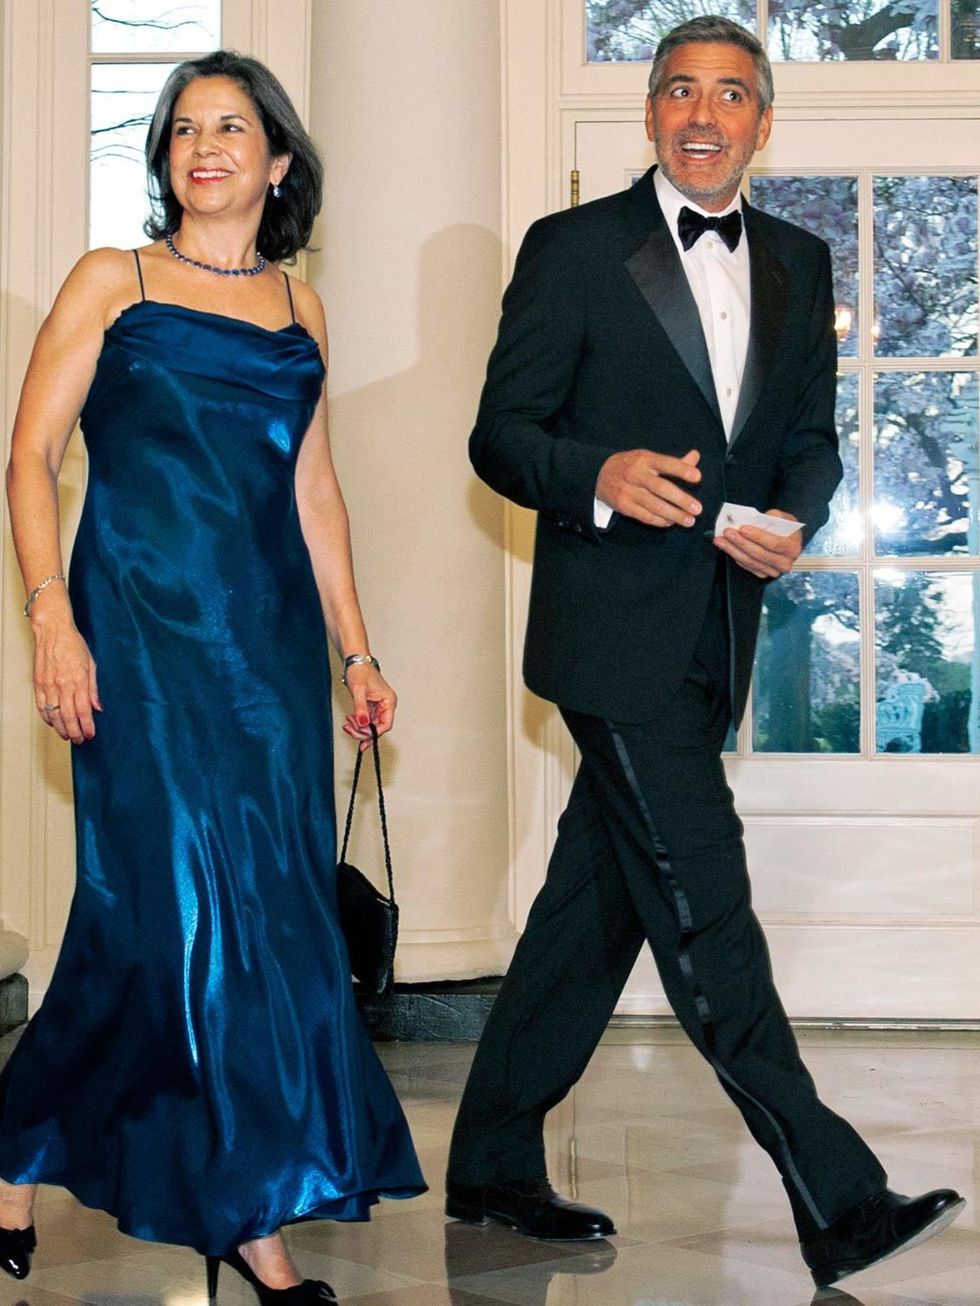 <p>George Clooney arrives for a State Dinner at the White House on March 14, 2012 in Washington D.C.</p>